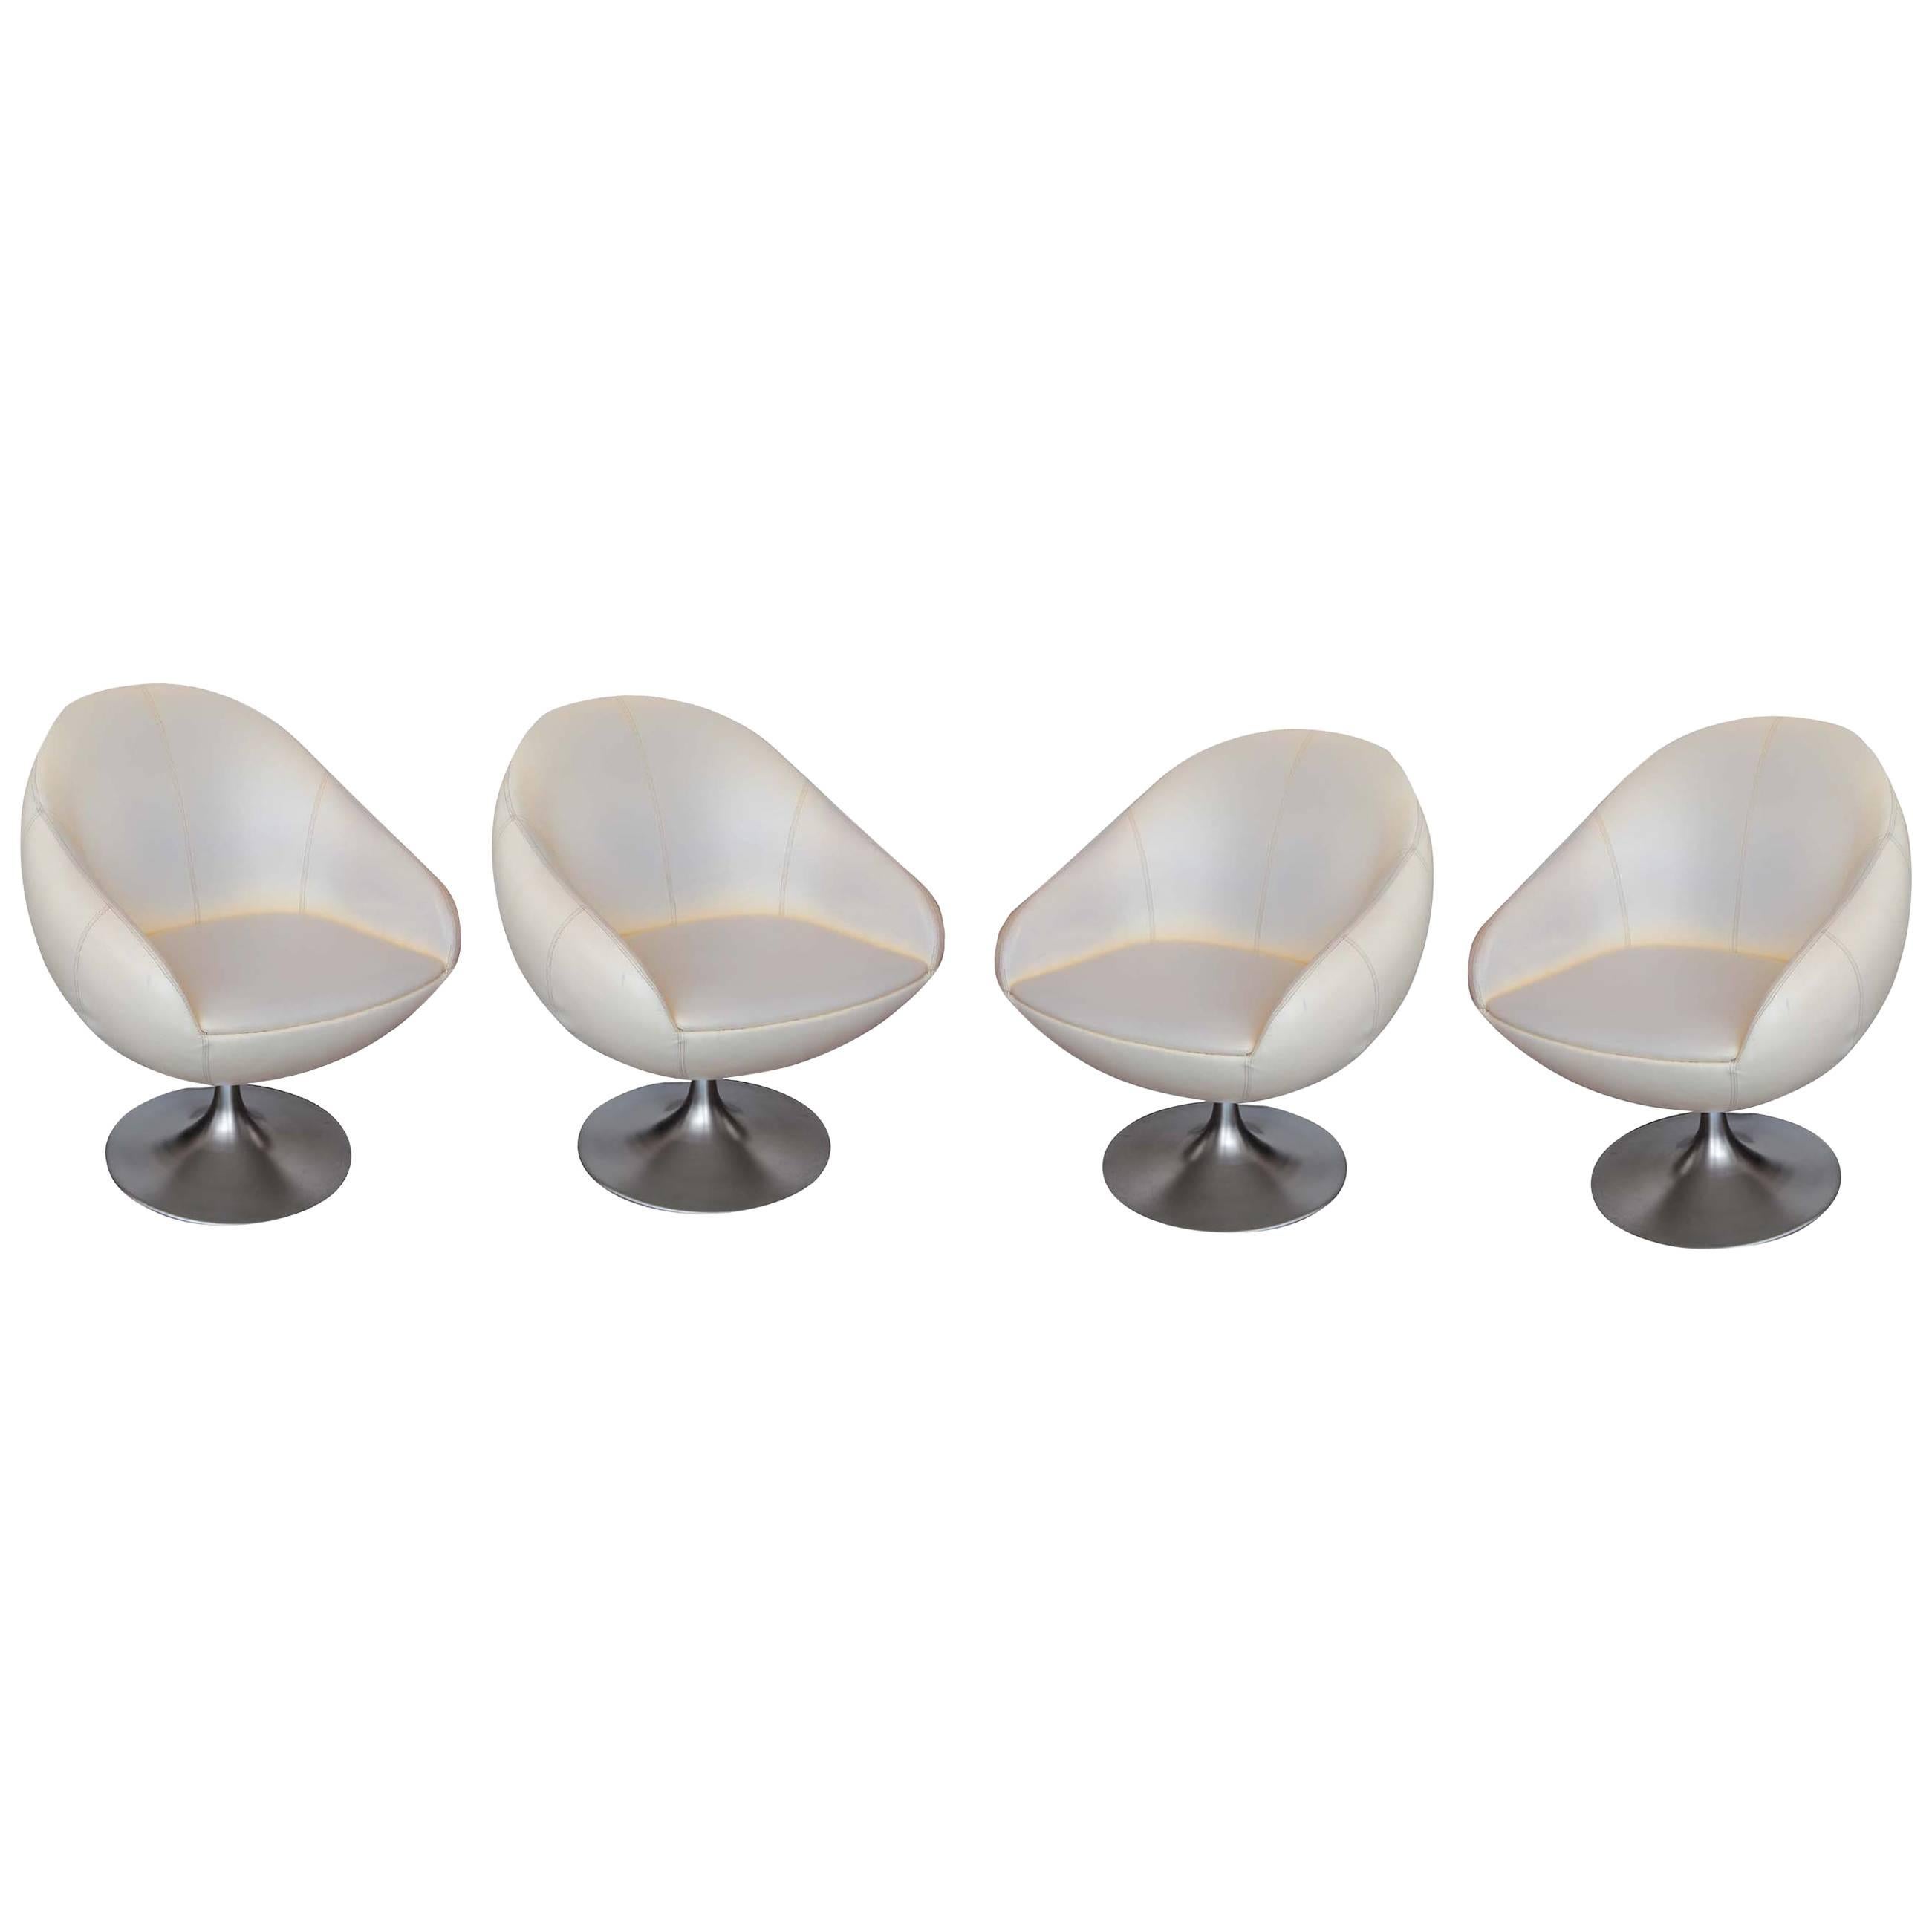 Vintage Egg Chairs 'Set of 4'